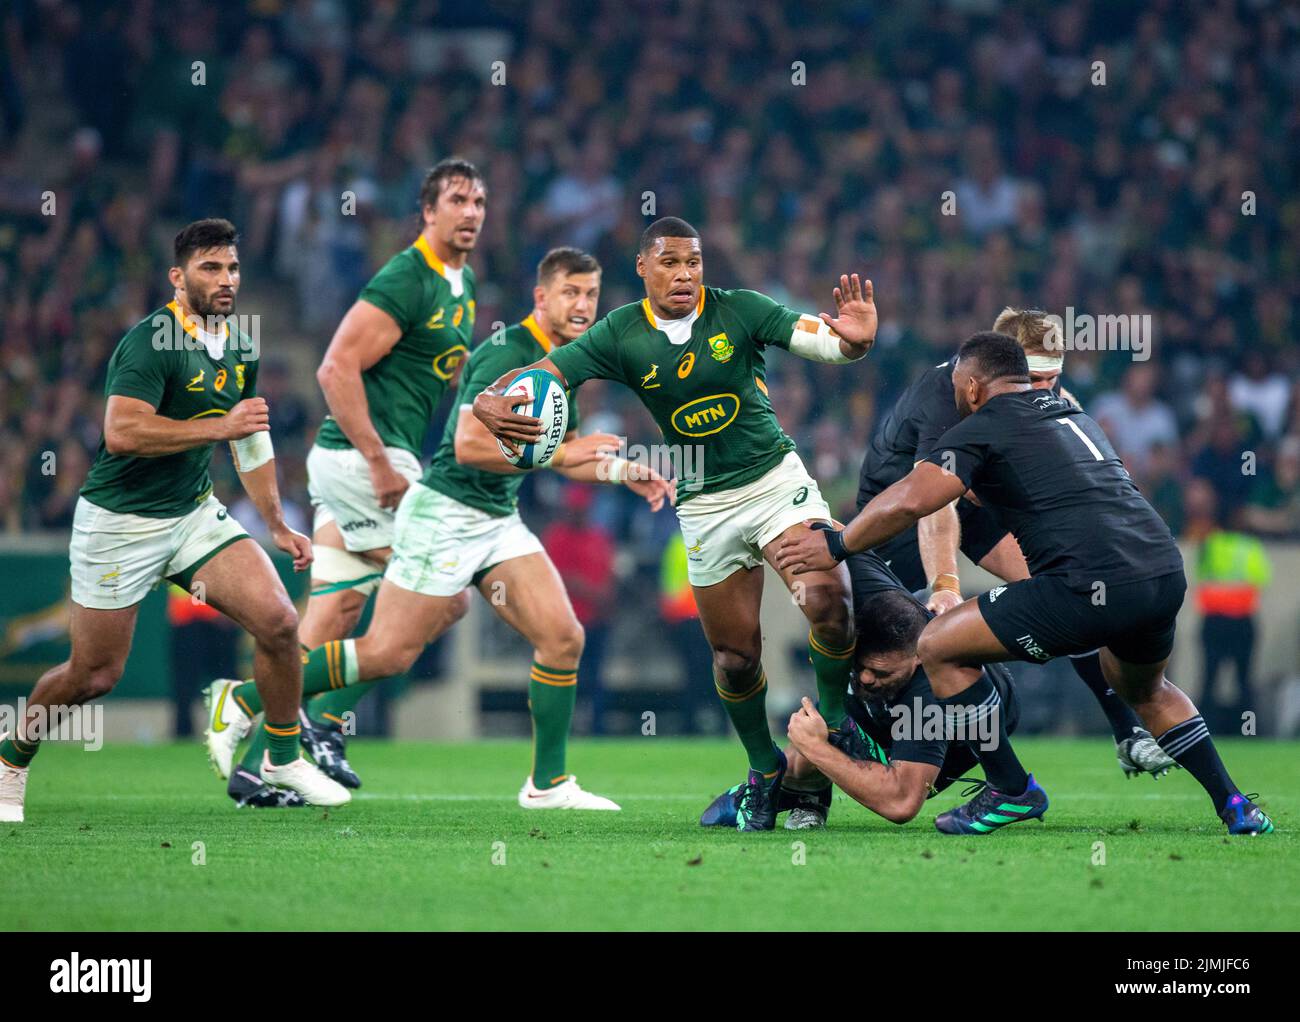 Mbombela, Nelspruit, South Africa. 6th August, 2022. Damian Willemse  with the ball during the Springbok test against the All Blacks at the Castle Lager Rugby Championship in Mbombela, Nelspruit Credit: AfriPics.com/Alamy Live News Stock Photo